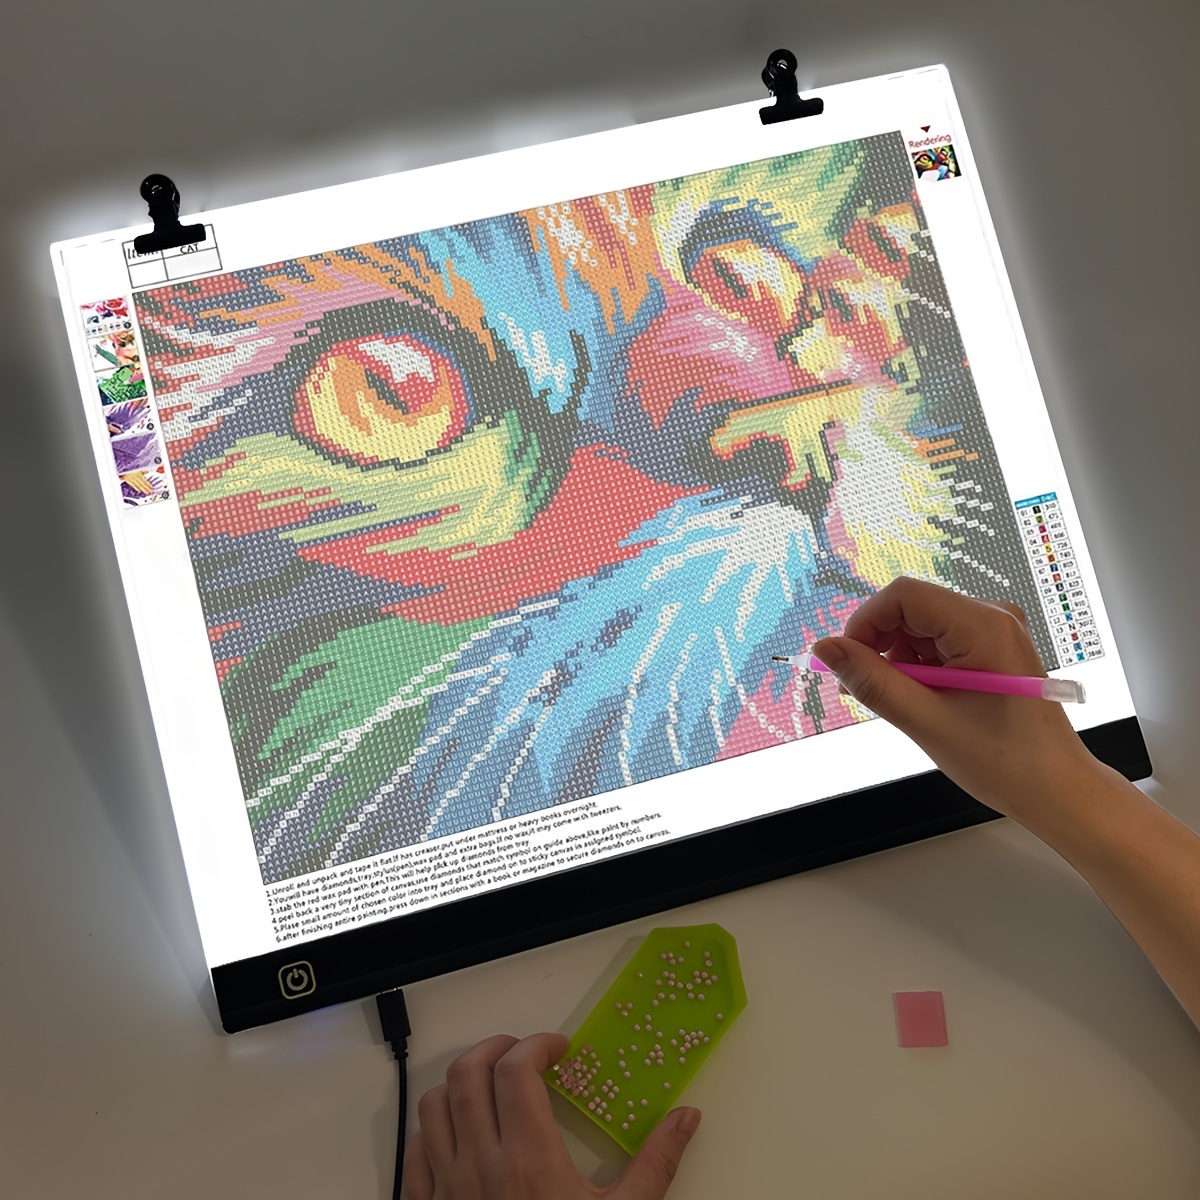 

Acrylic Led Light Pad Kit For Diamond Painting With Adjustable Brightness, Usb Powered Tracing Board For Sketching, Animation, Drawing - Diamond Art Light Board Accessories With Clips